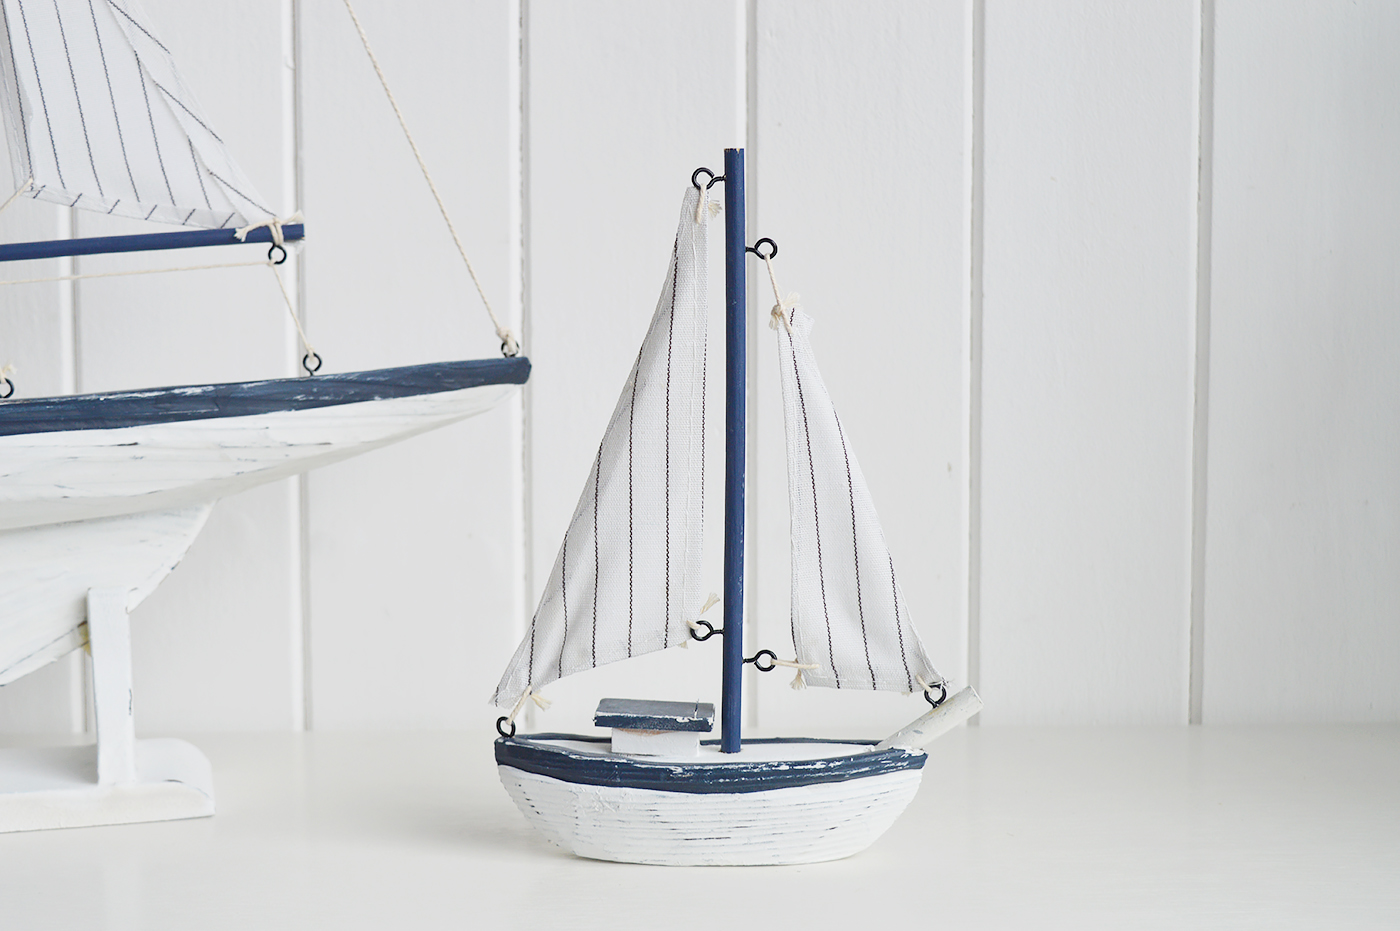 White Furniture and accessories for the home. A decorative white and blue yacht. Coastal Nautical Interior design Accessories for New England style homes and interiors